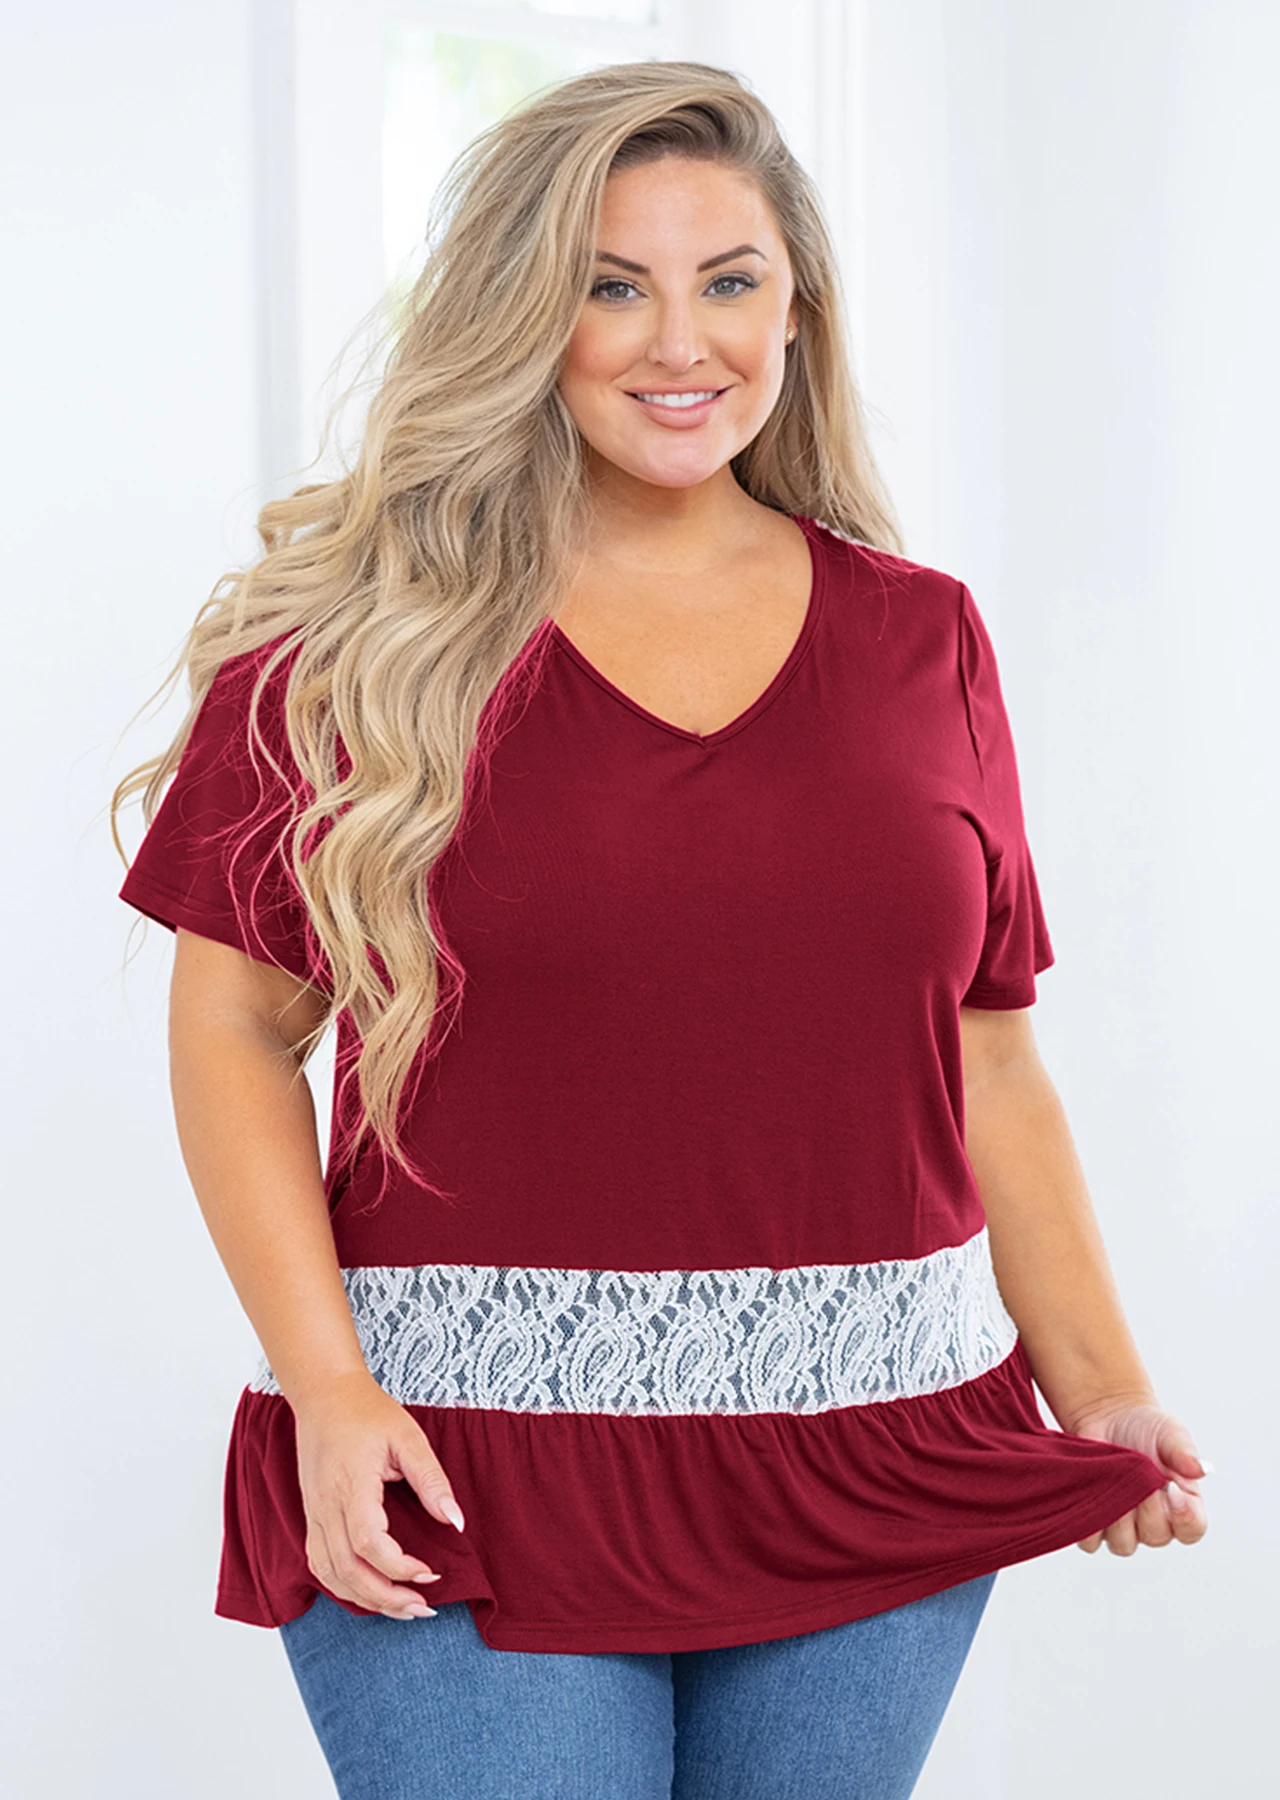 showmall-women’s-plus-size-t-shirt-short-sleeves-top-v-neck-tunics-casual-loose-fit-basics-for-women